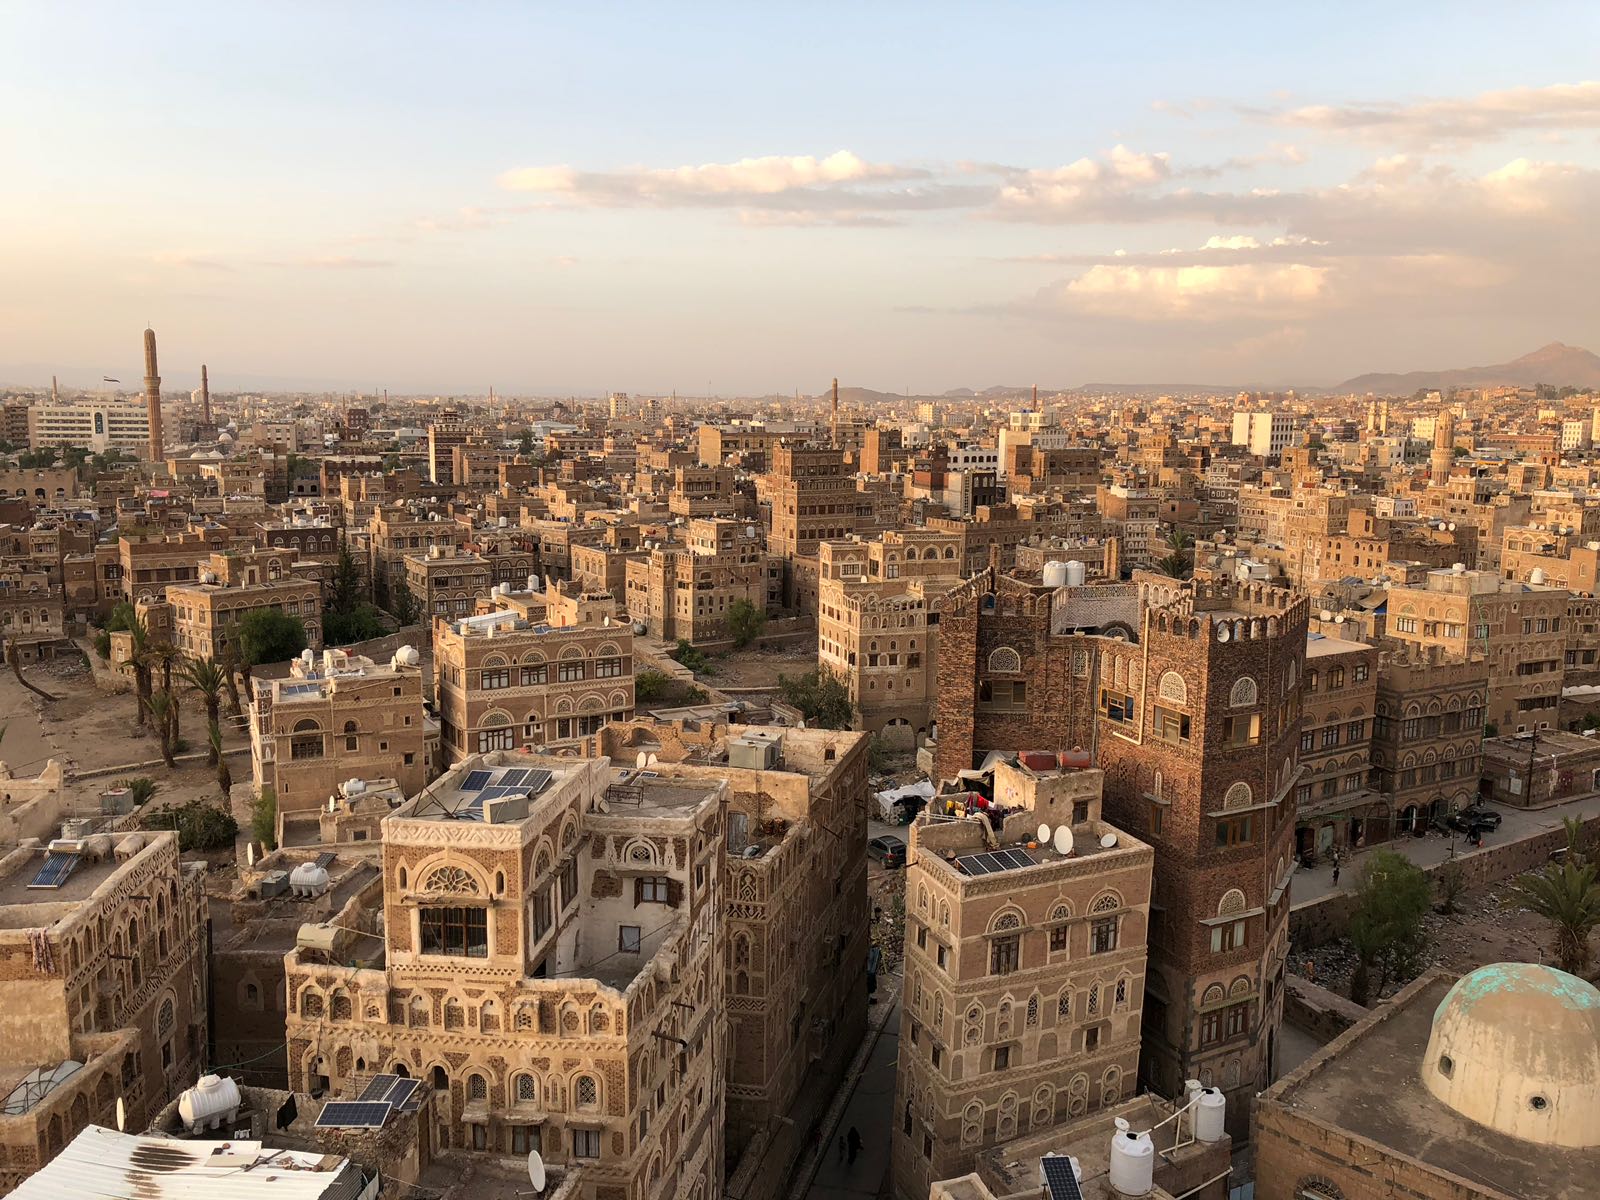 The characteristic buildings of Yemen is a unique sight